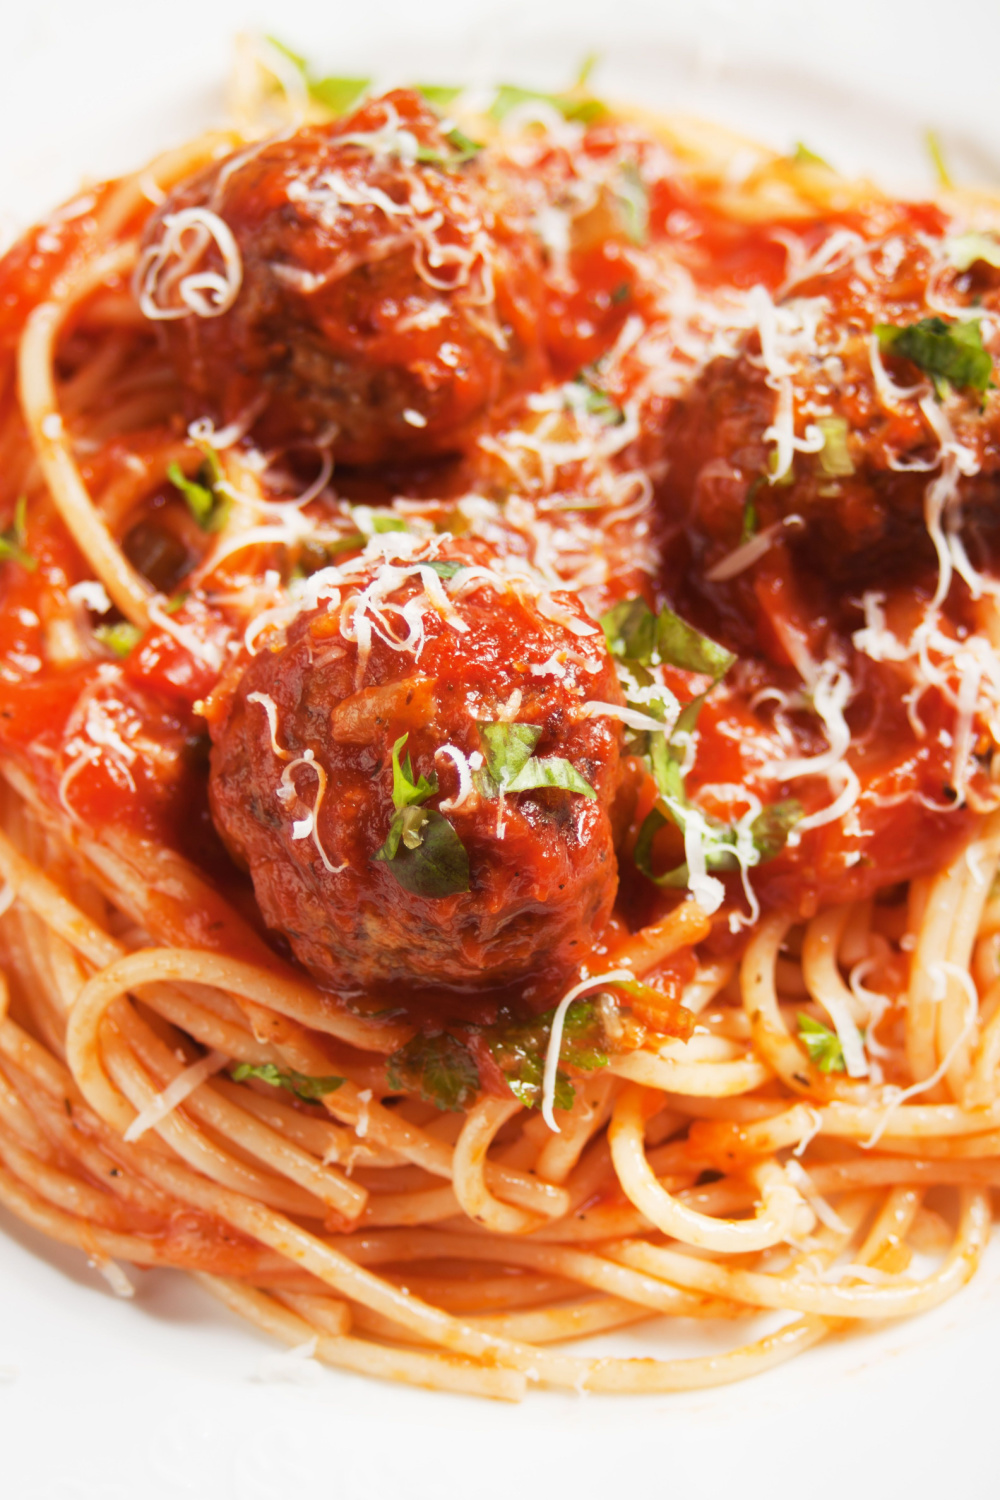 Ina Garten's Real Meatballs and Spaghetti featuring Spaghetti Served With Real Meatballs Covered with Cheese and Basil